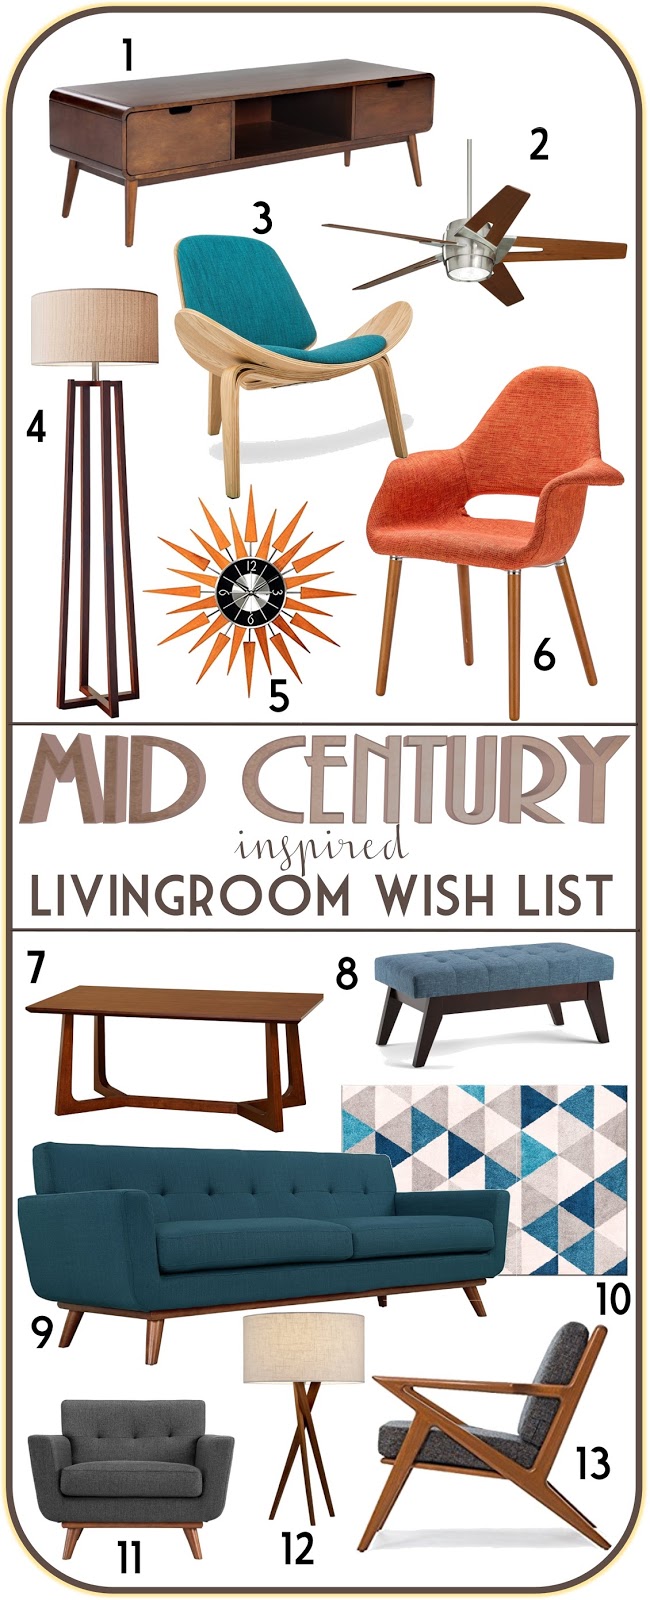 Mid century modern inspired living room furniture moodboard. More economical option to buying original mid century pieces - good place to start while I search for original 1950s and 1960s gems!